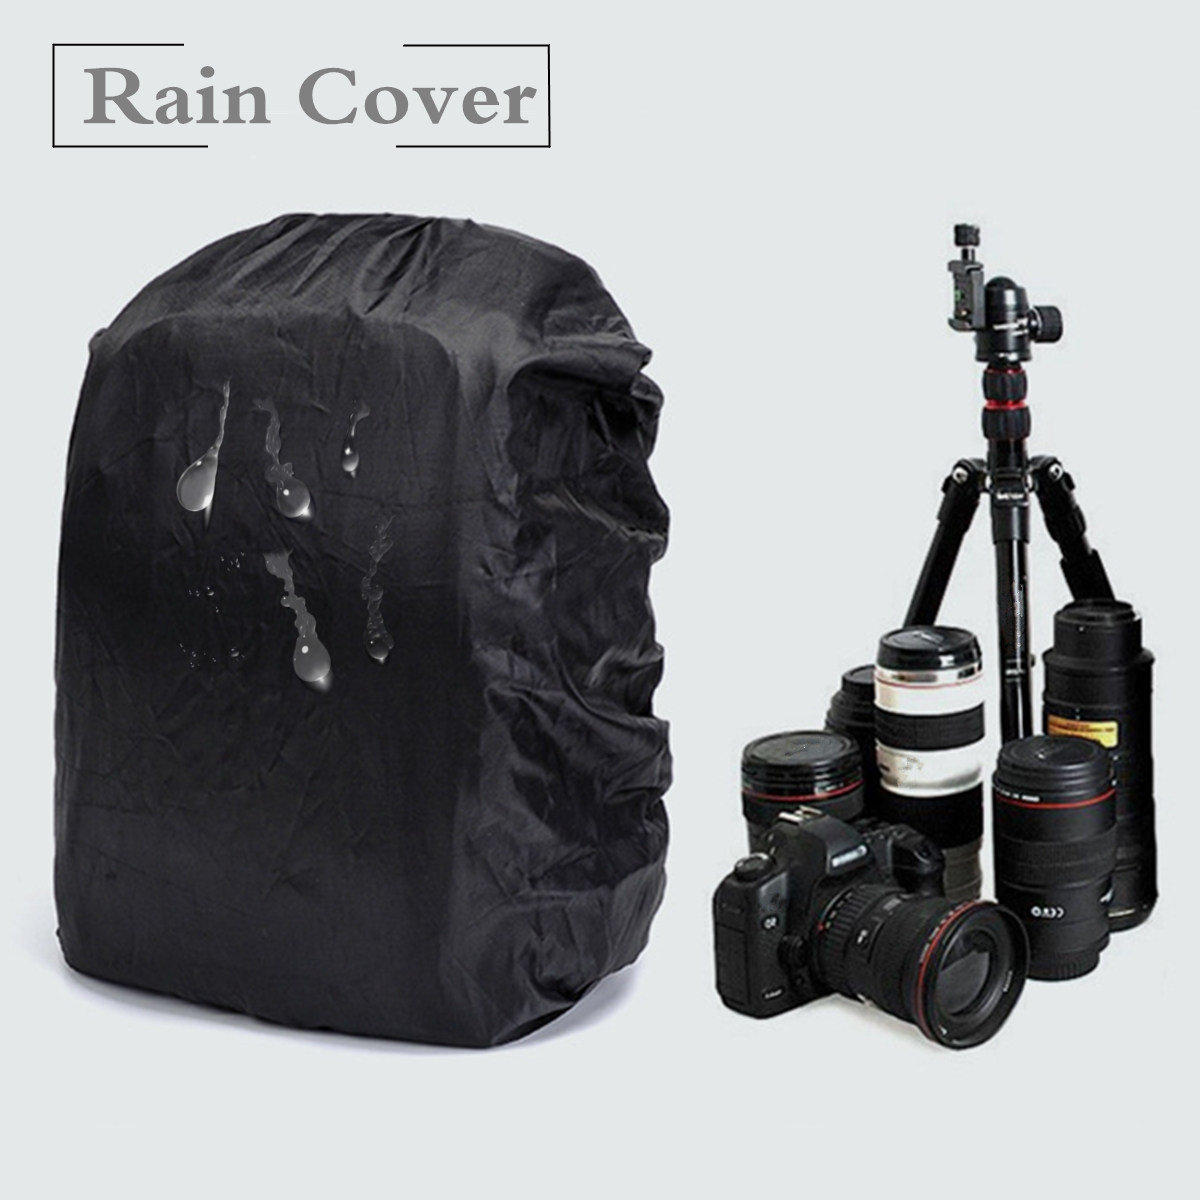 Waterproof Camera Backpack Travel DSLR Bag W/ Rain Cover For Canon Sony 13